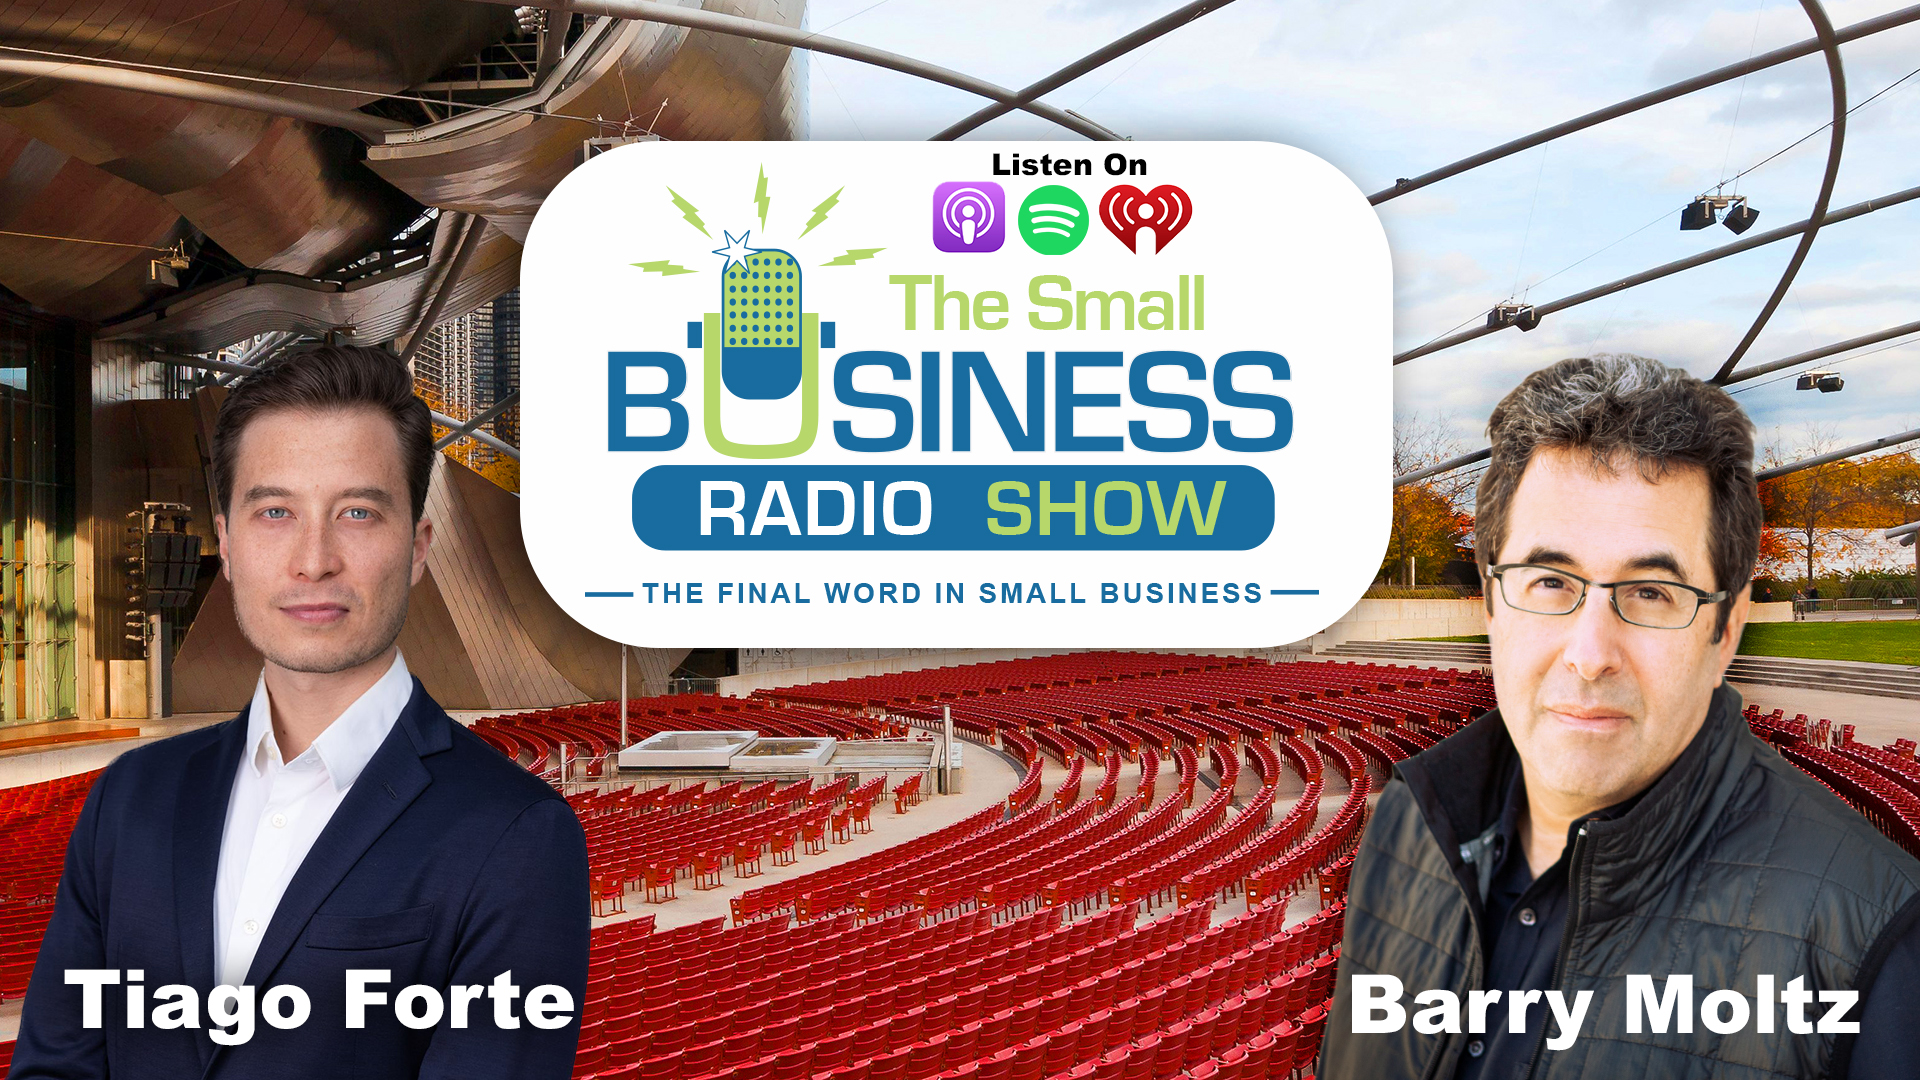 Tiago Forte on The Small Business Radio Show